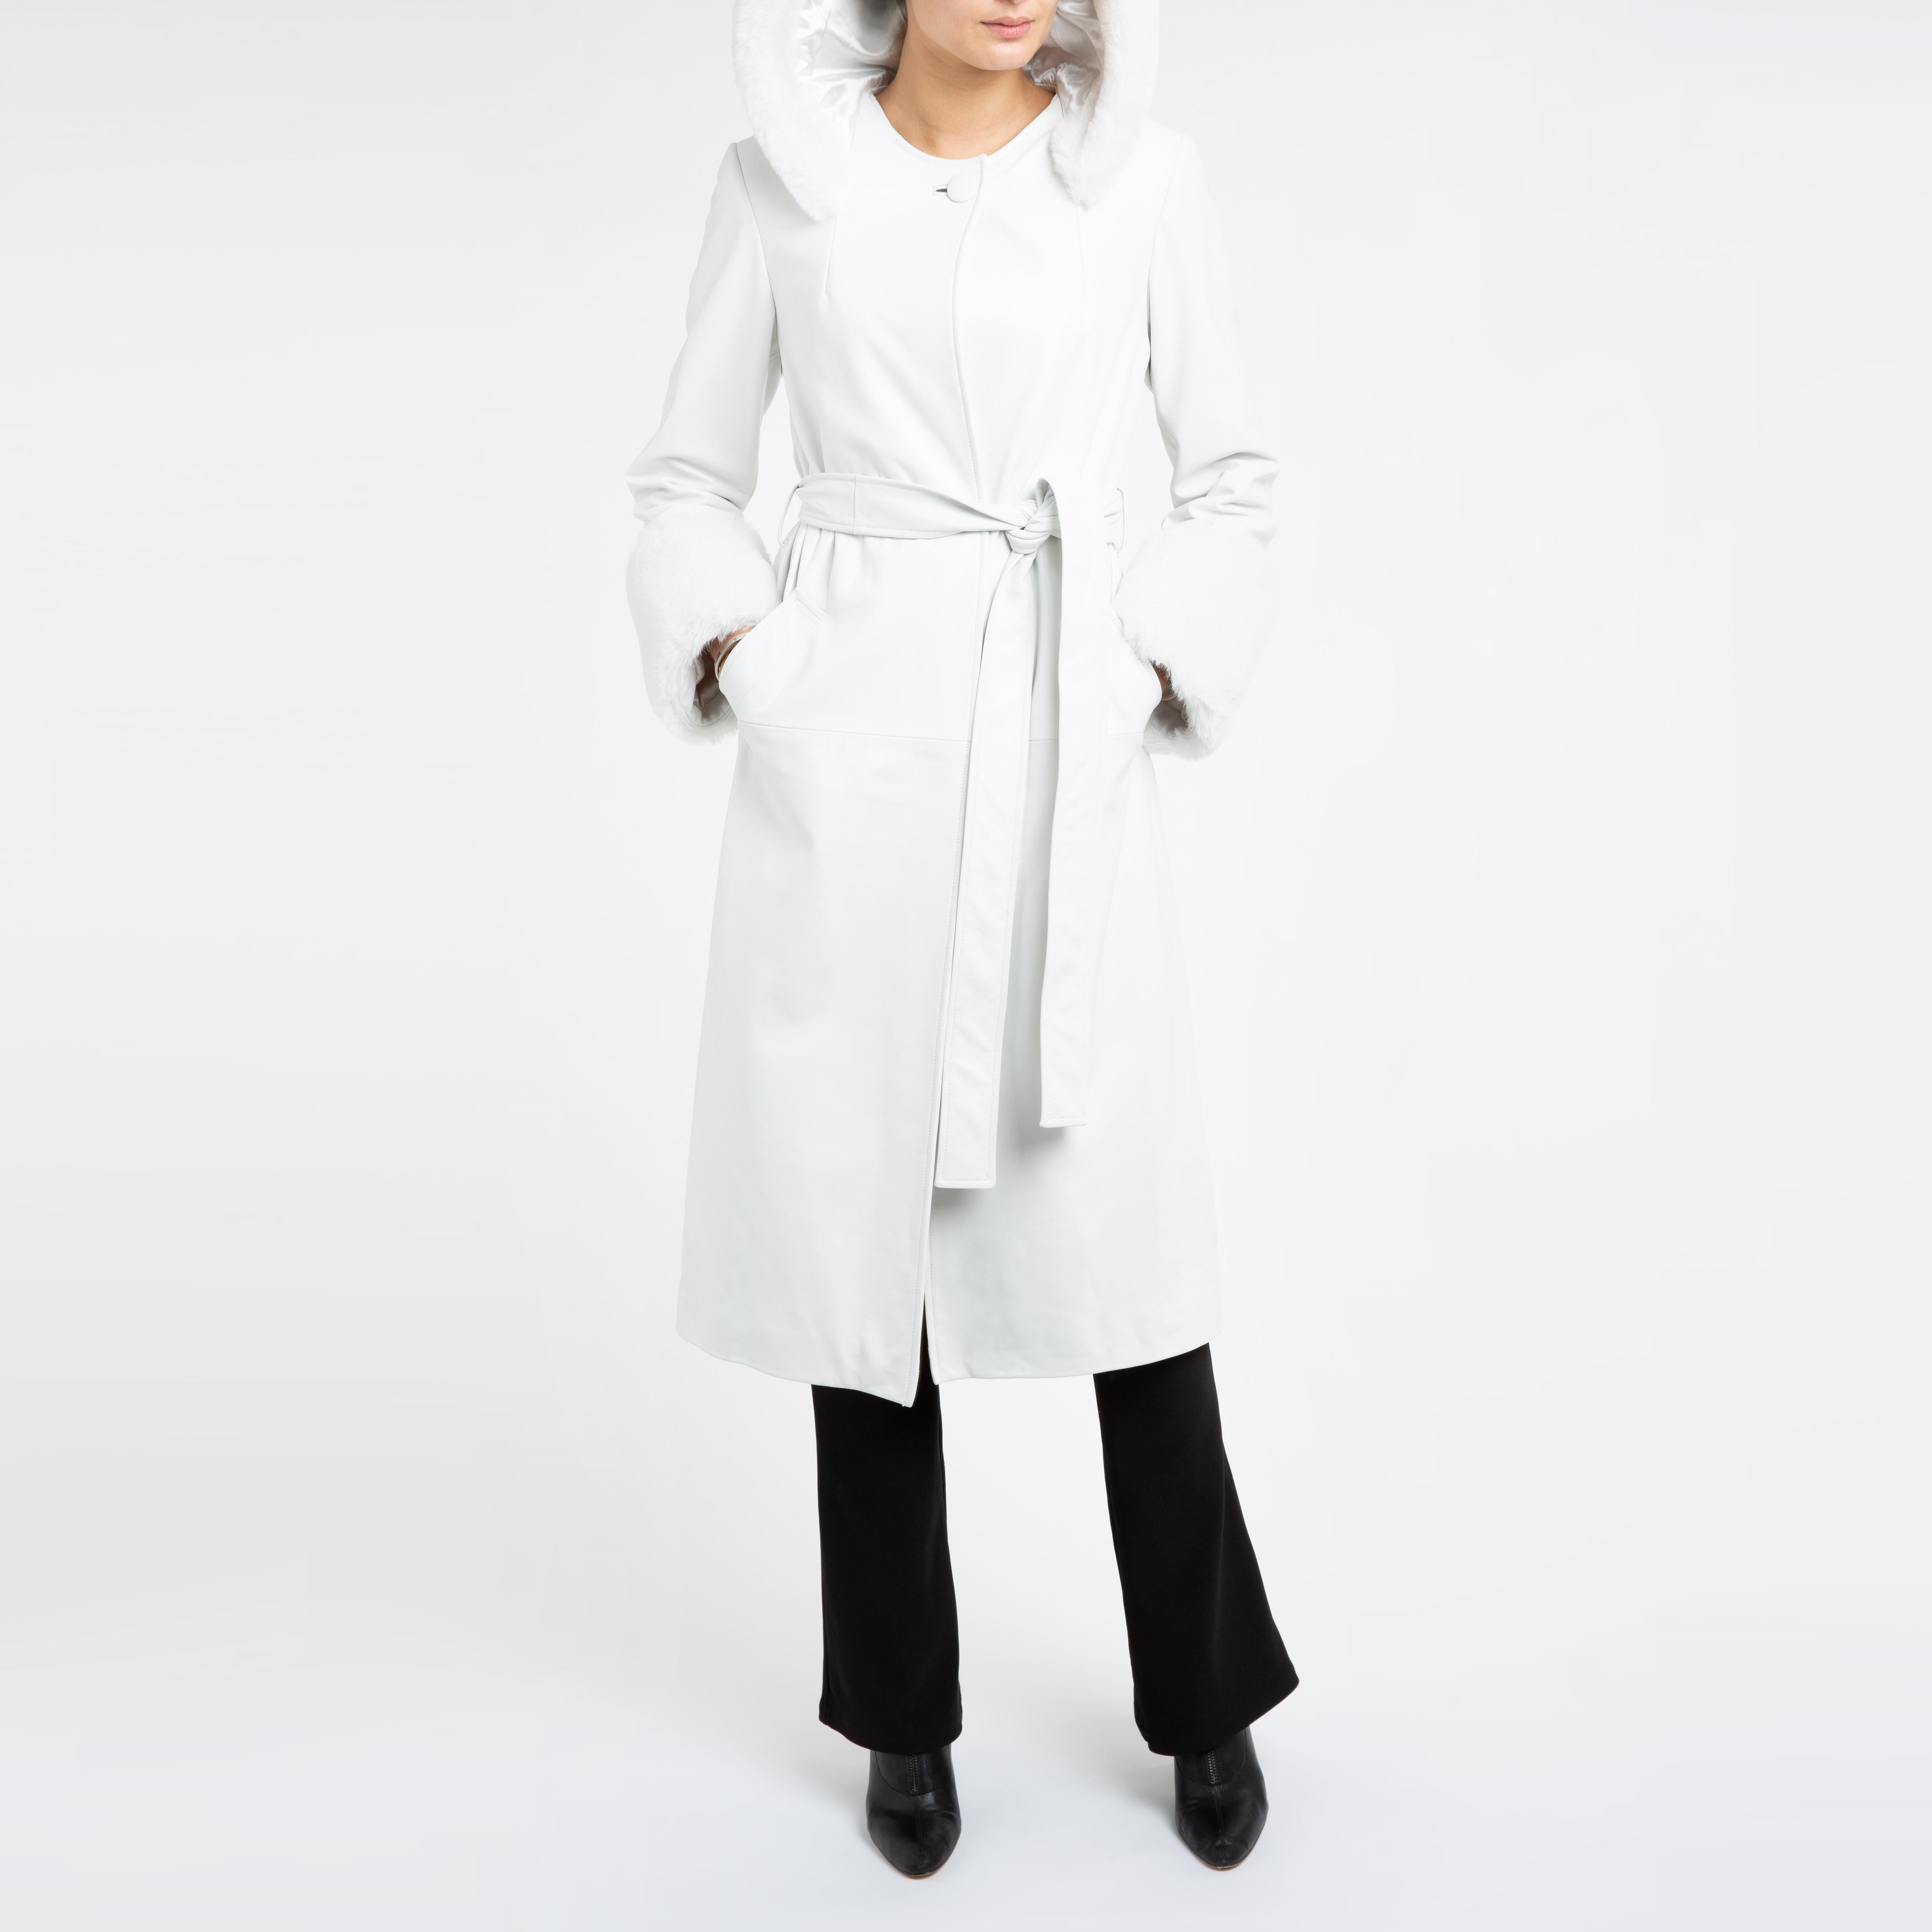 Verheyen Aurora Hooded Leather Trench Coat in White with Faux Fur - Size uk 12  For Sale 6